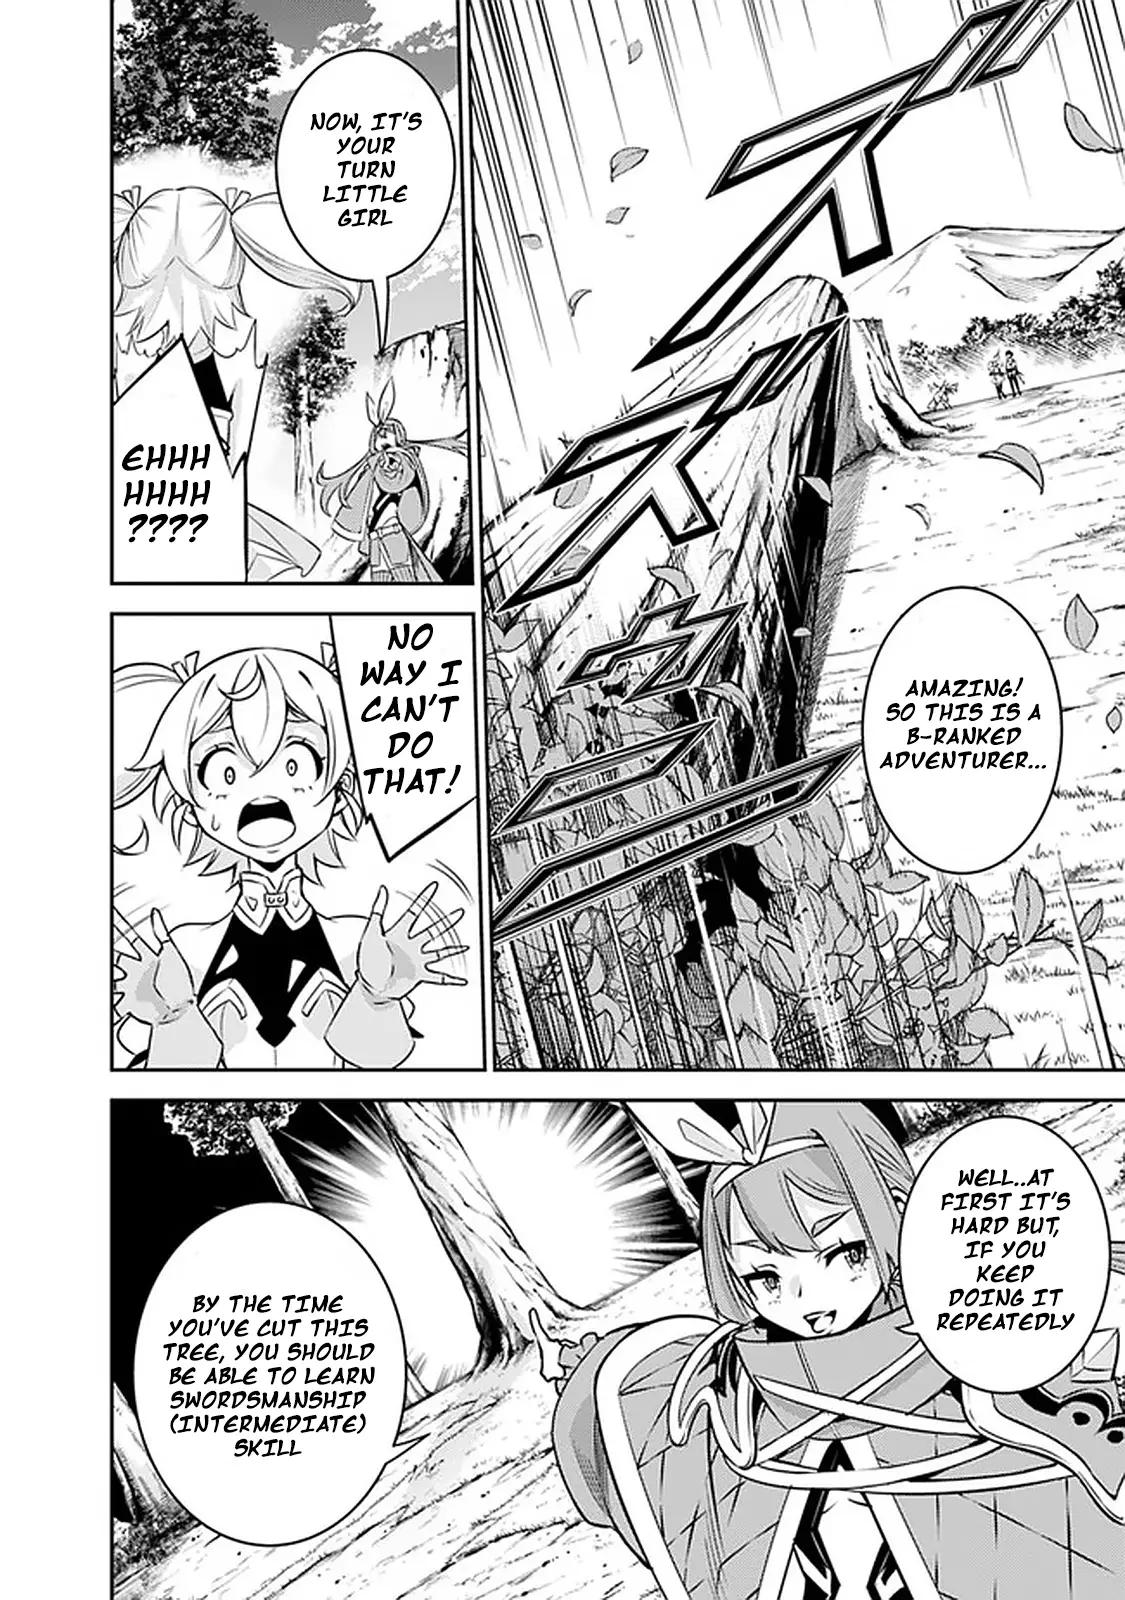 The Strongest Magical Swordsman Ever Reborn As An F-Rank Adventurer. - 28 page 10